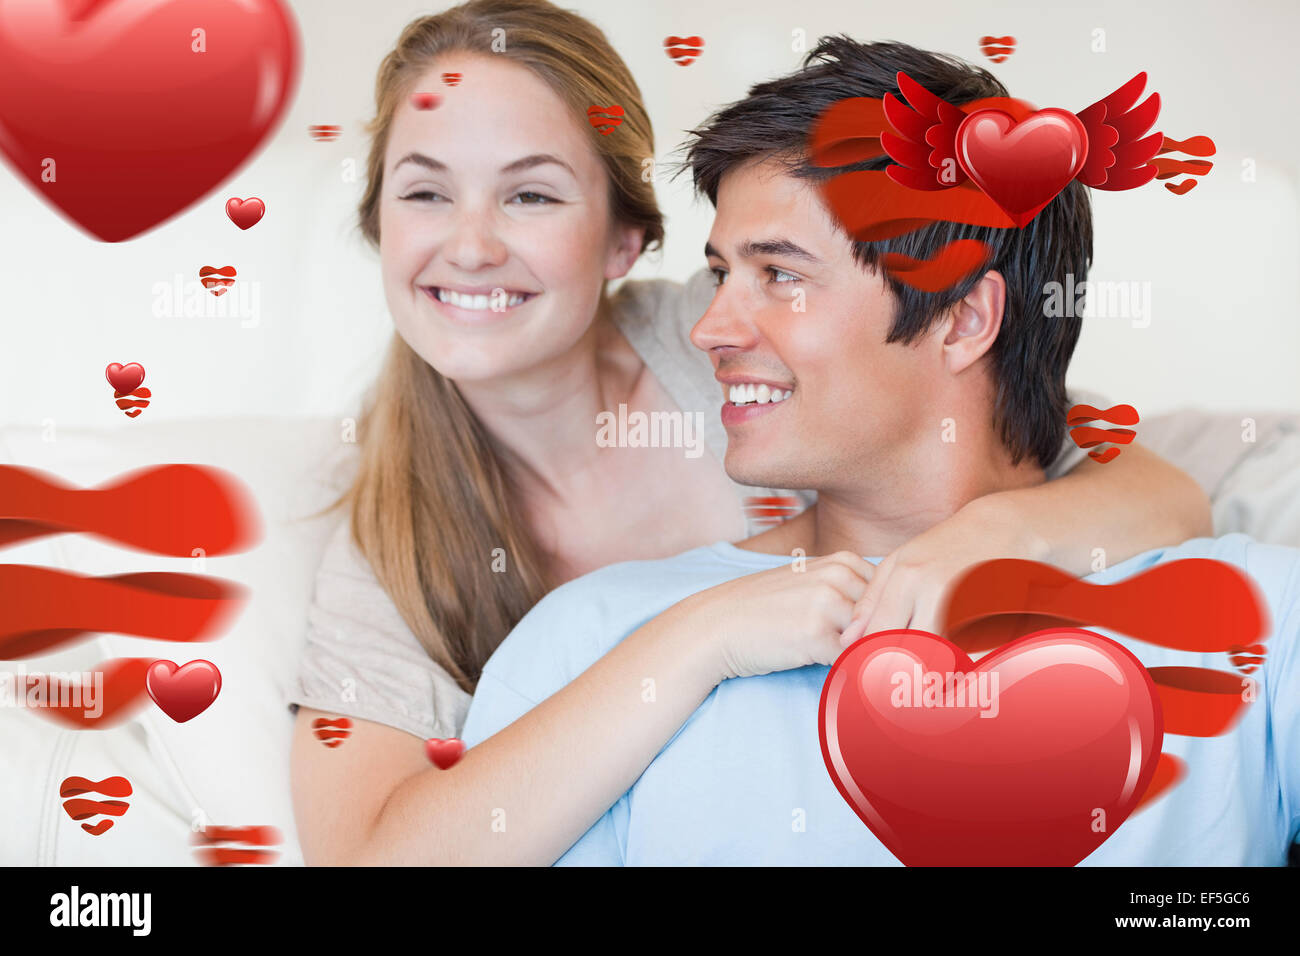 Composite image of close up of a young couple posing Stock Photo